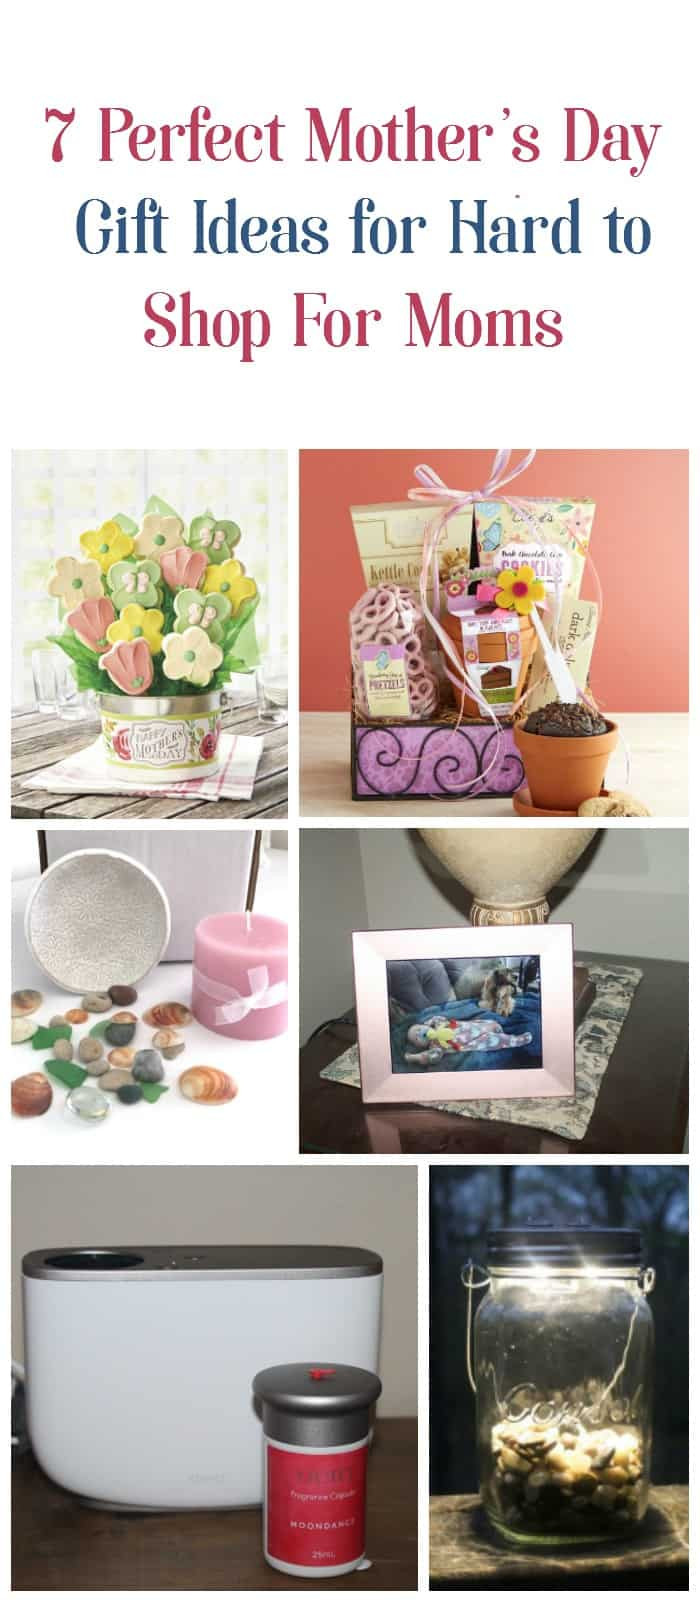 Unusual Mothers Day Gift Ideas
 7 Perfectly Original Mother s Day Gifts for Moms Who Are